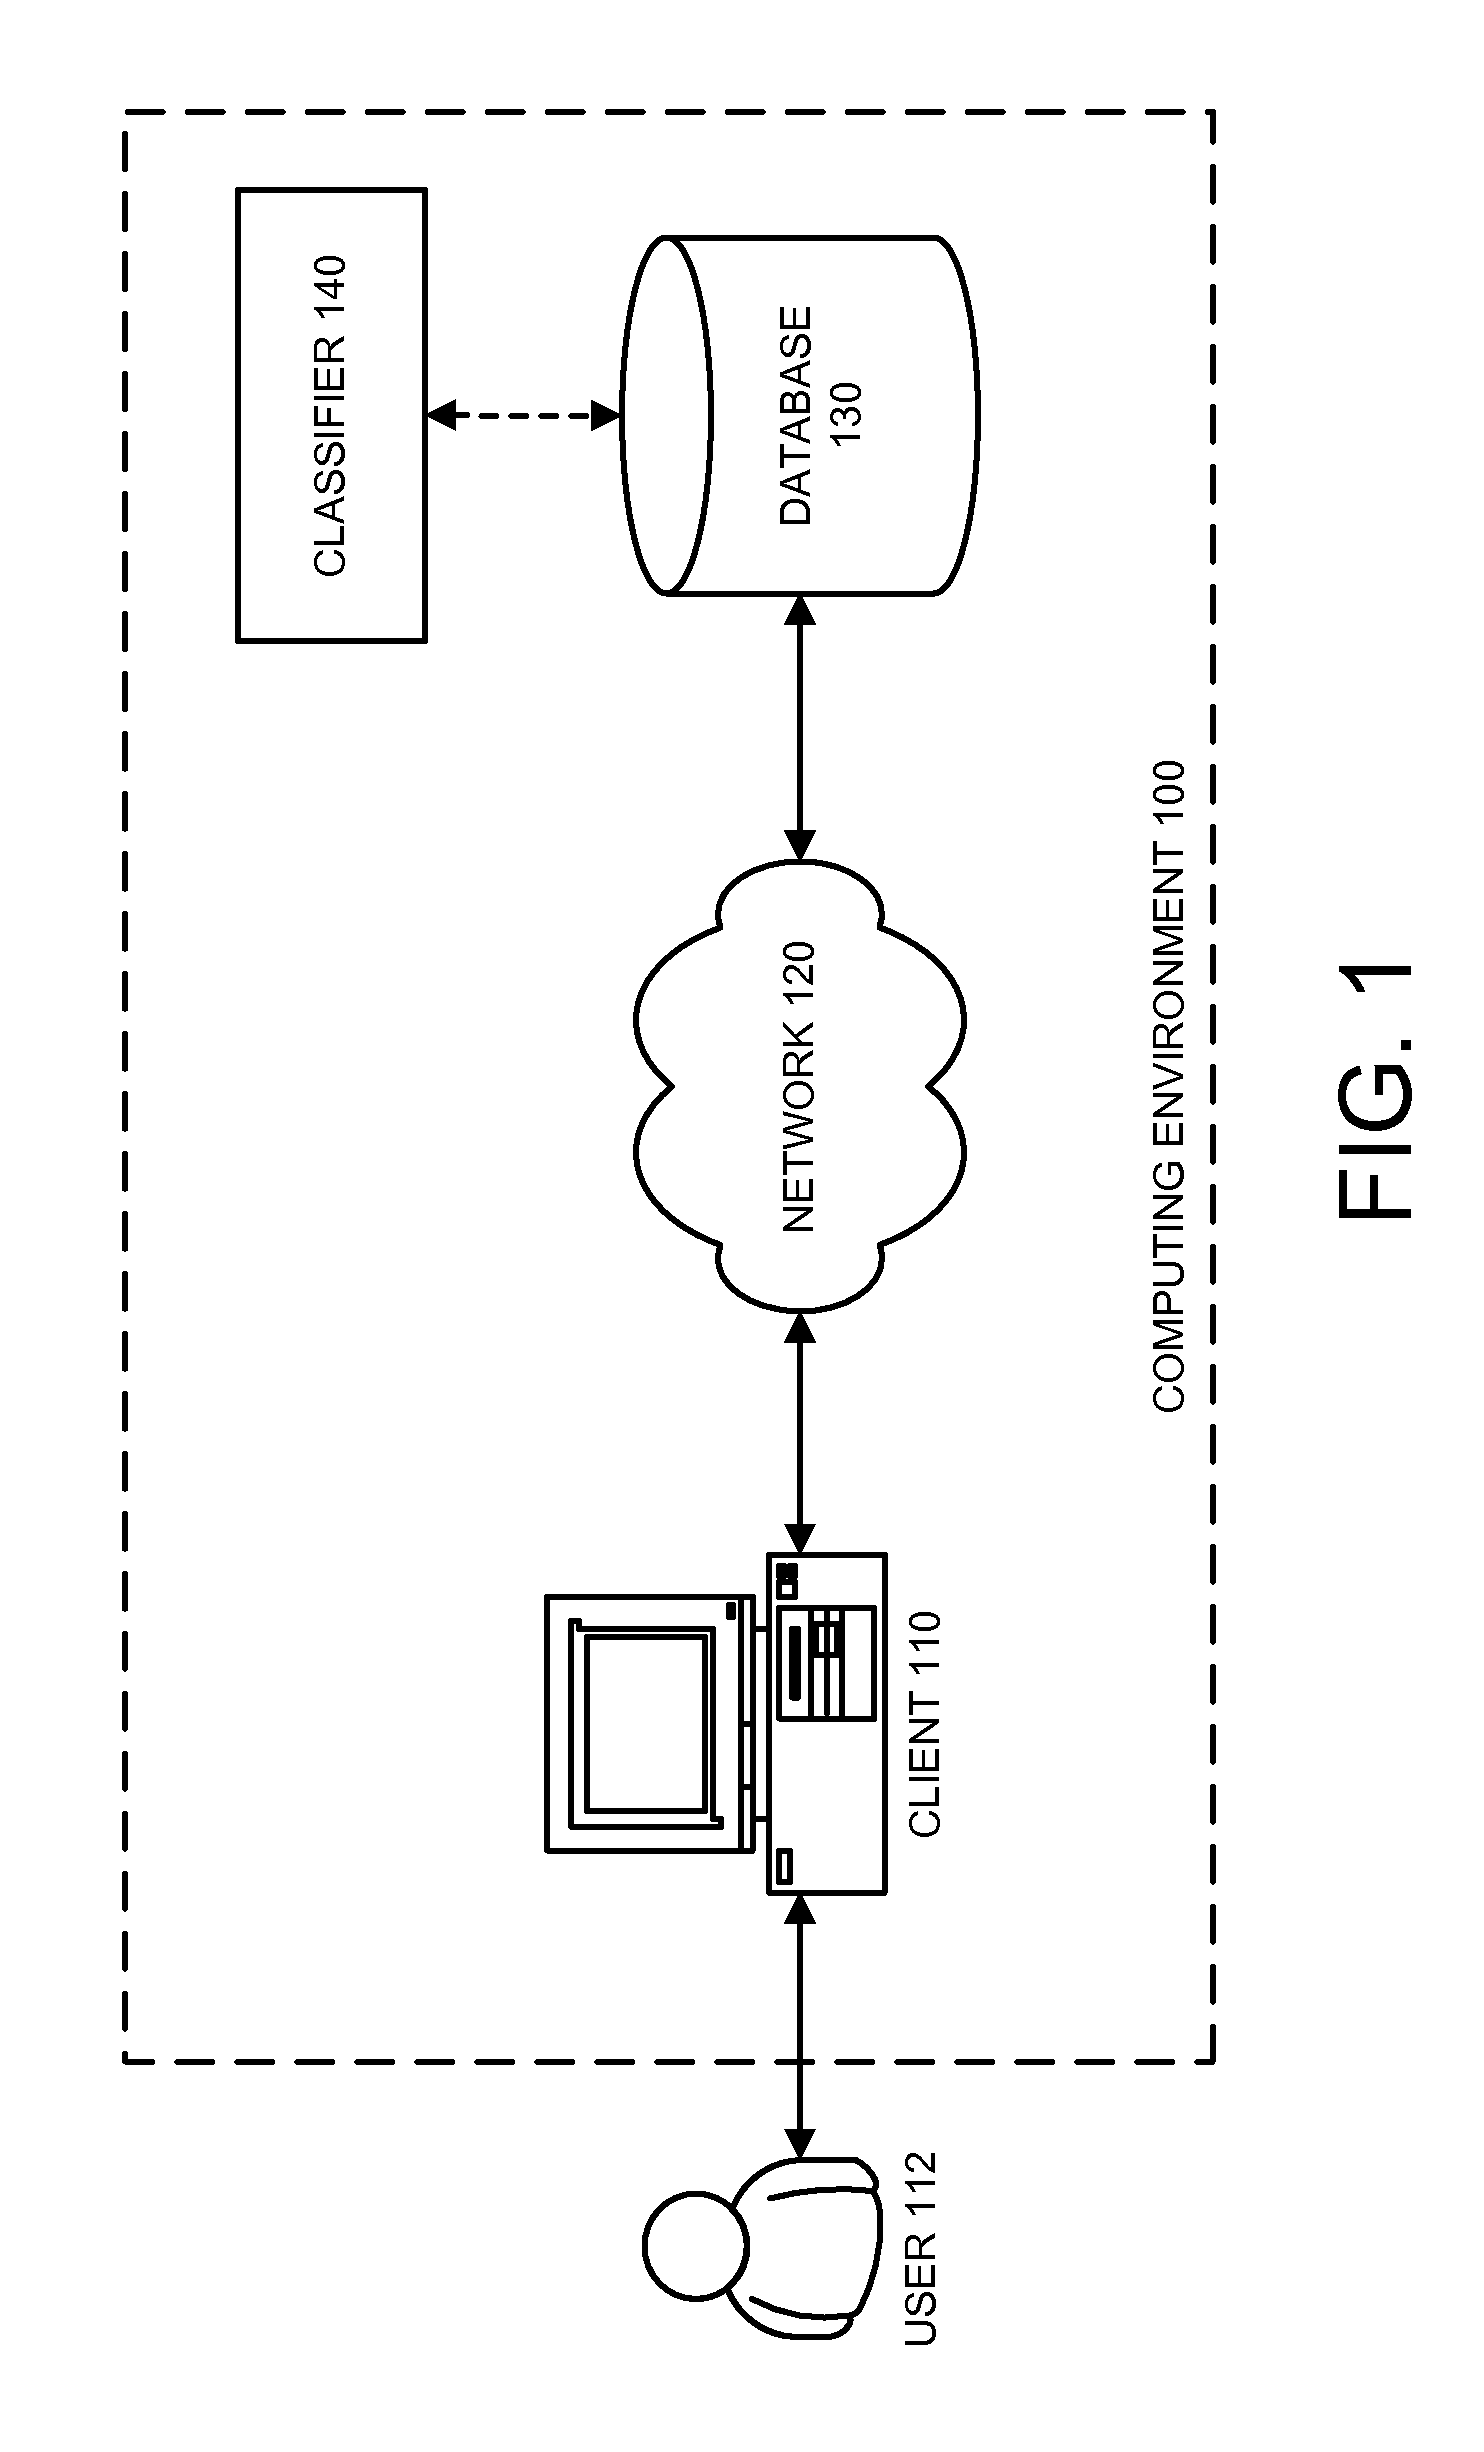 Method and apparatus for automatically classifying data